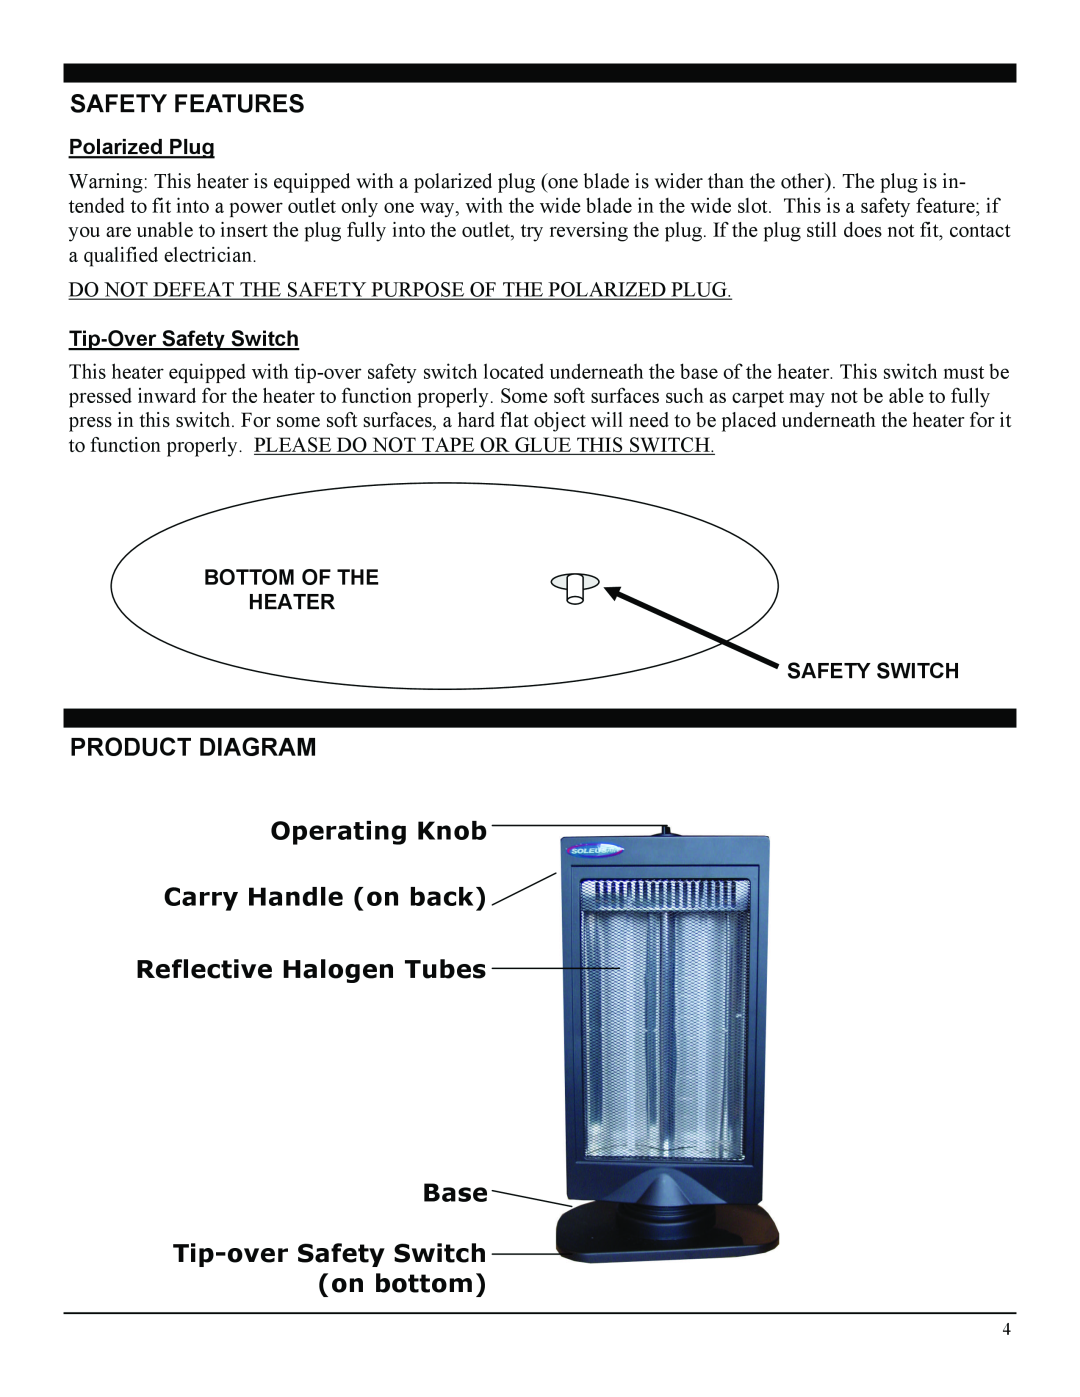 Soleus Air 3077997 Safety Features, Product Diagram, Operating Knob Carry Handle on back, Reflective Halogen Tubes Base 